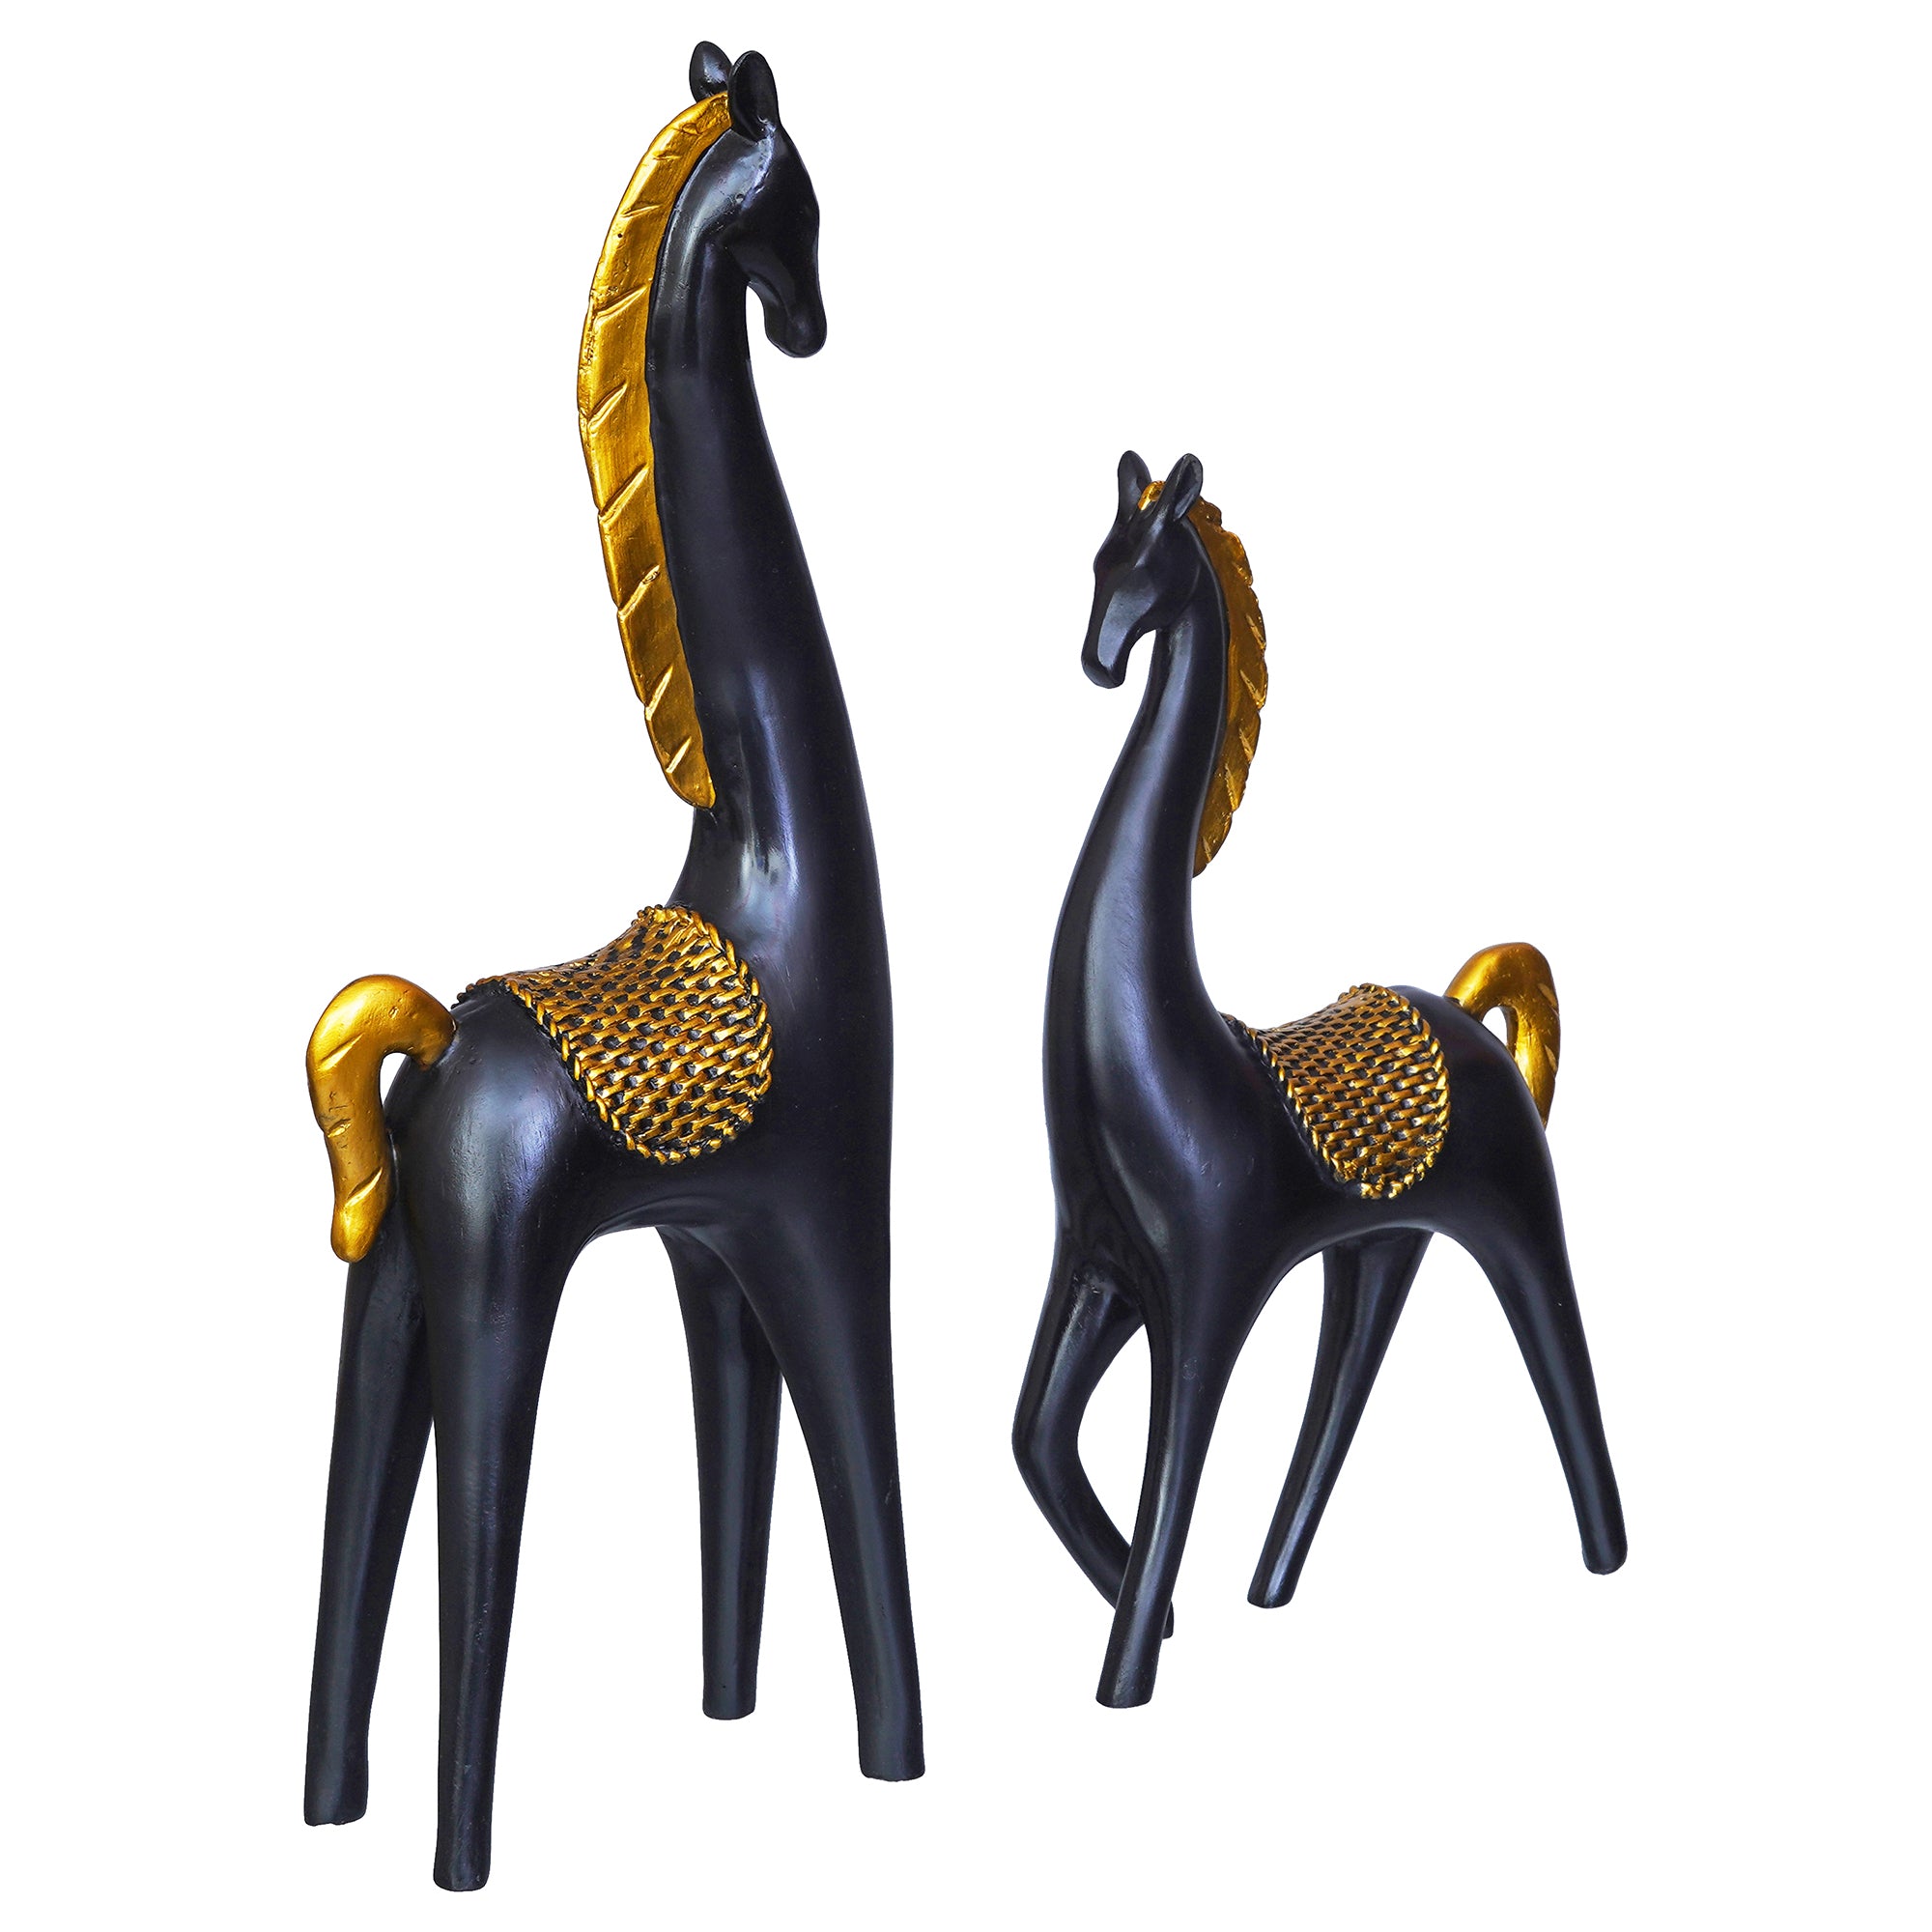 Set of 2 Black Horse Statues with Golden Hair Decorative Animal Figurines 7